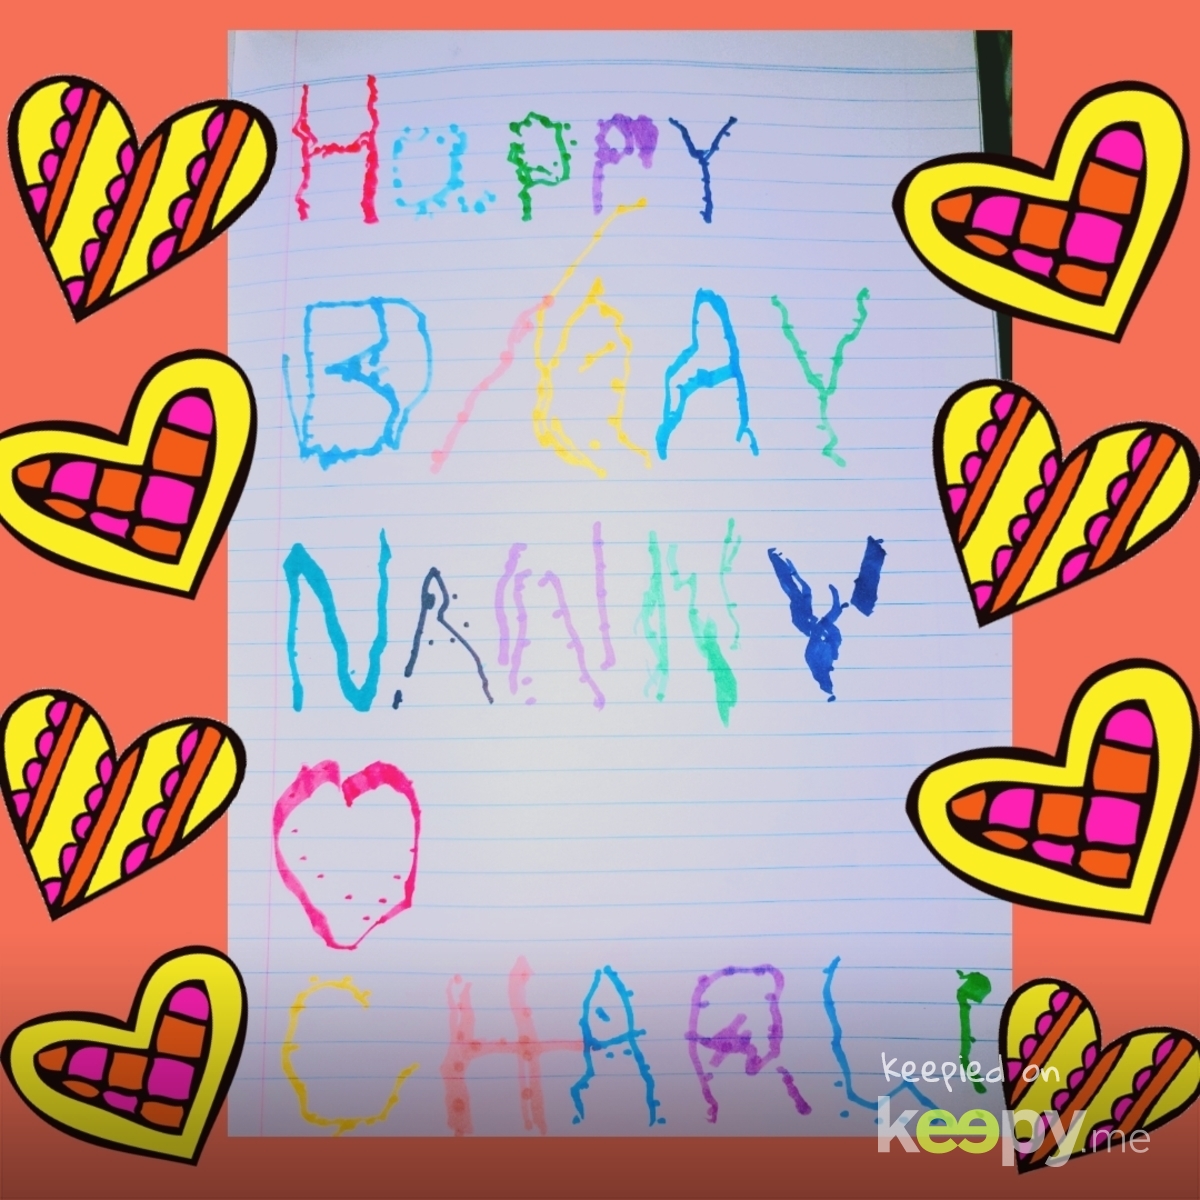 Charli wrote this for her Nanny's birthday  » Keepy.me